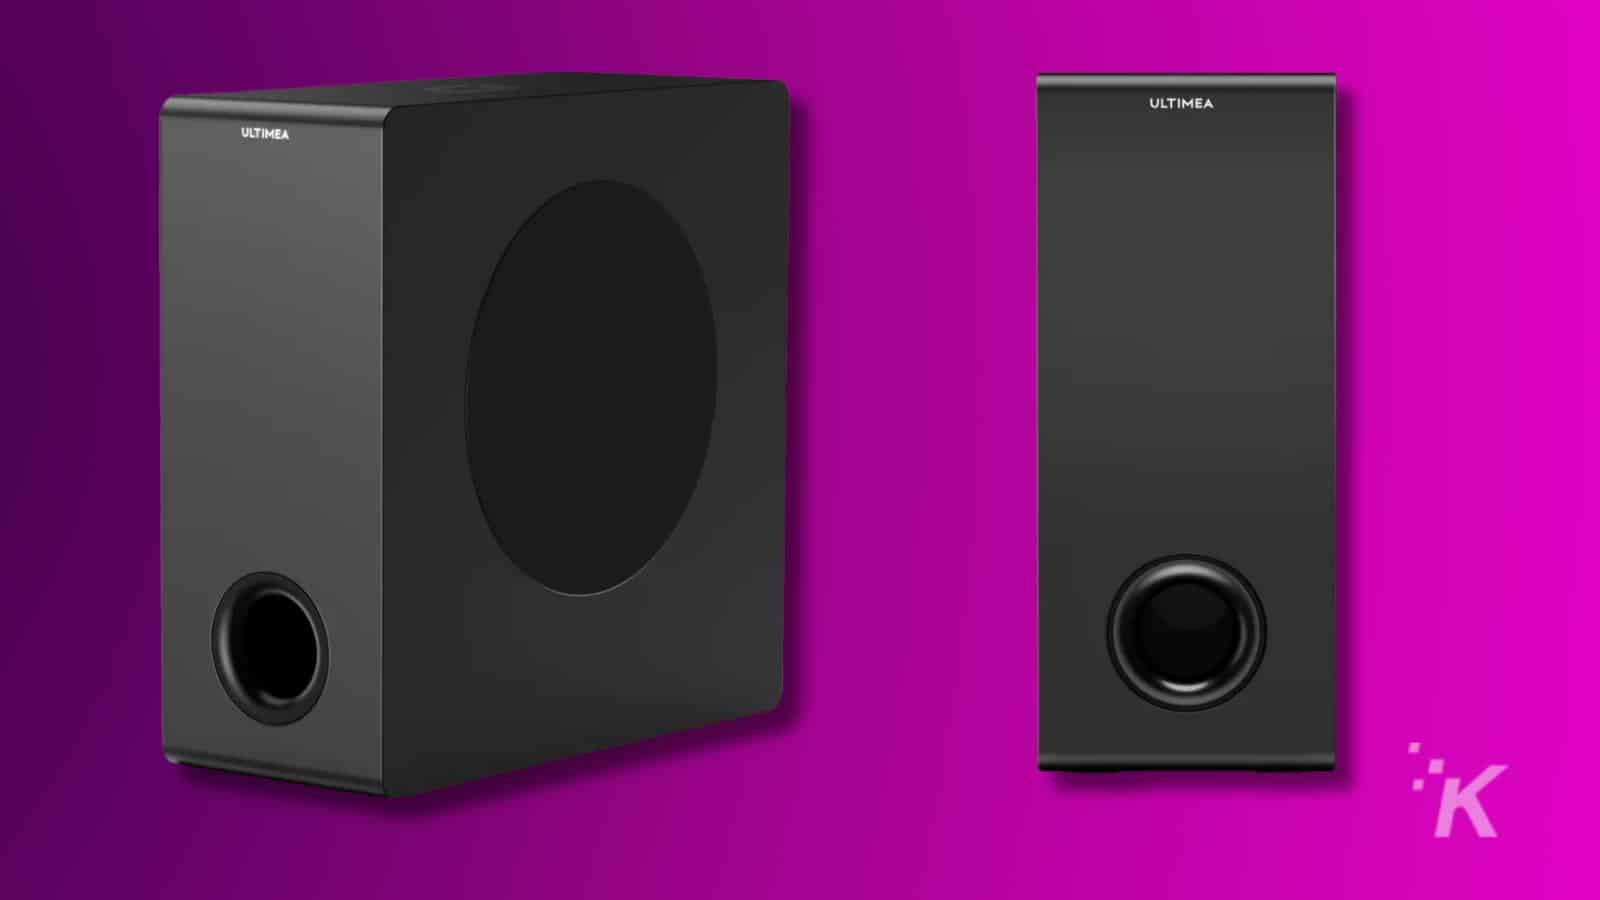 A studio monitor, subwoofer, and sound box are producing stereophonic sound from an array of electronic devices and audio equipment.